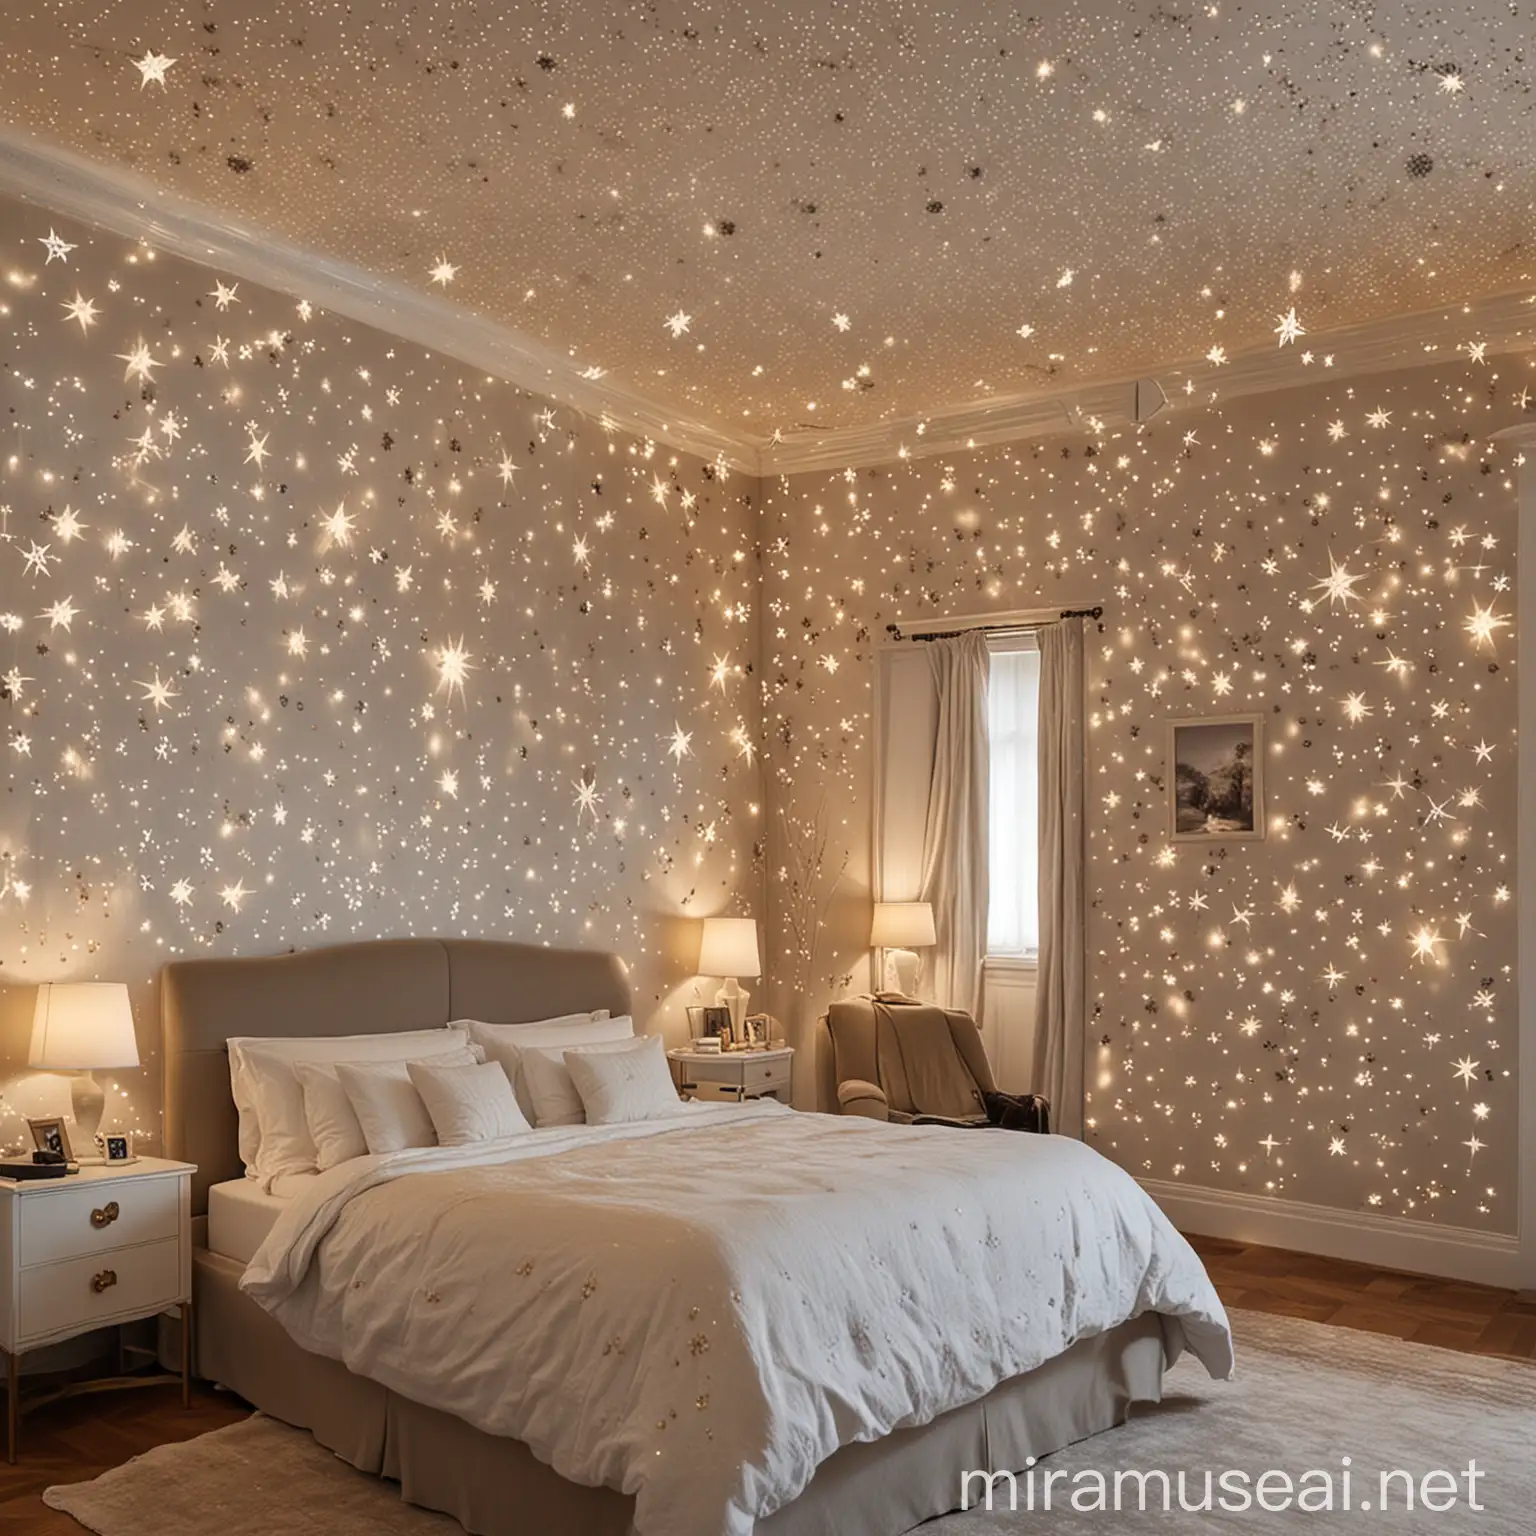 A bedroom with walls made of

 shimmering stars